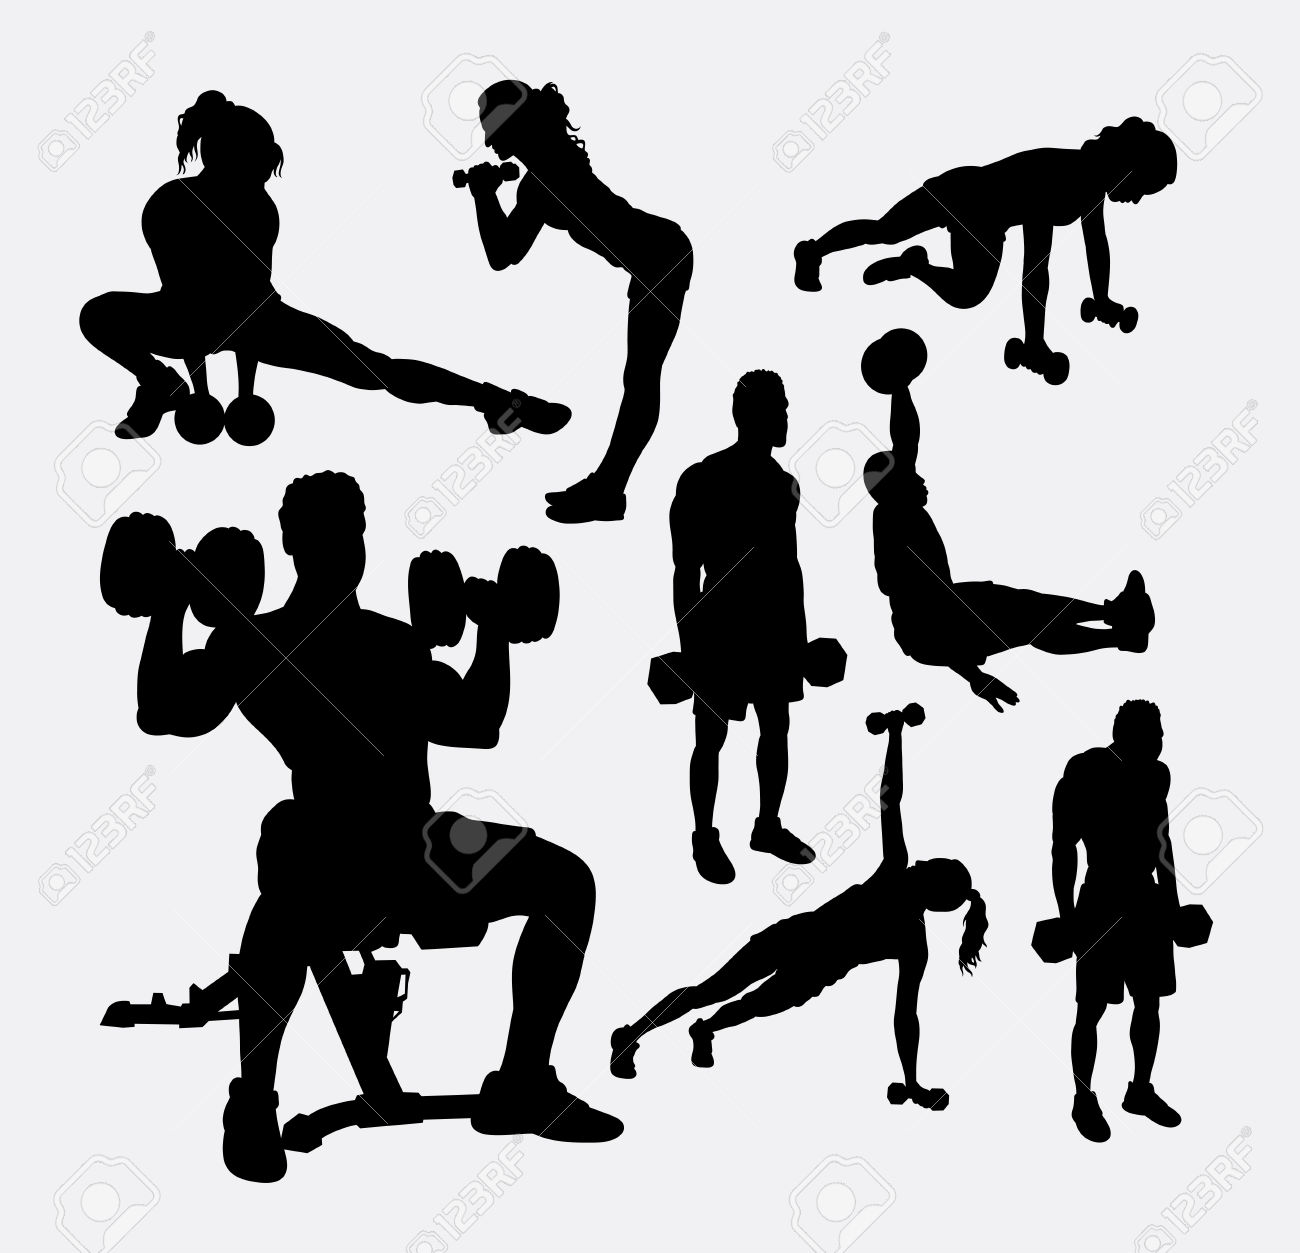 Training Exercise Sport Male And Female Silhouette. Good Use.